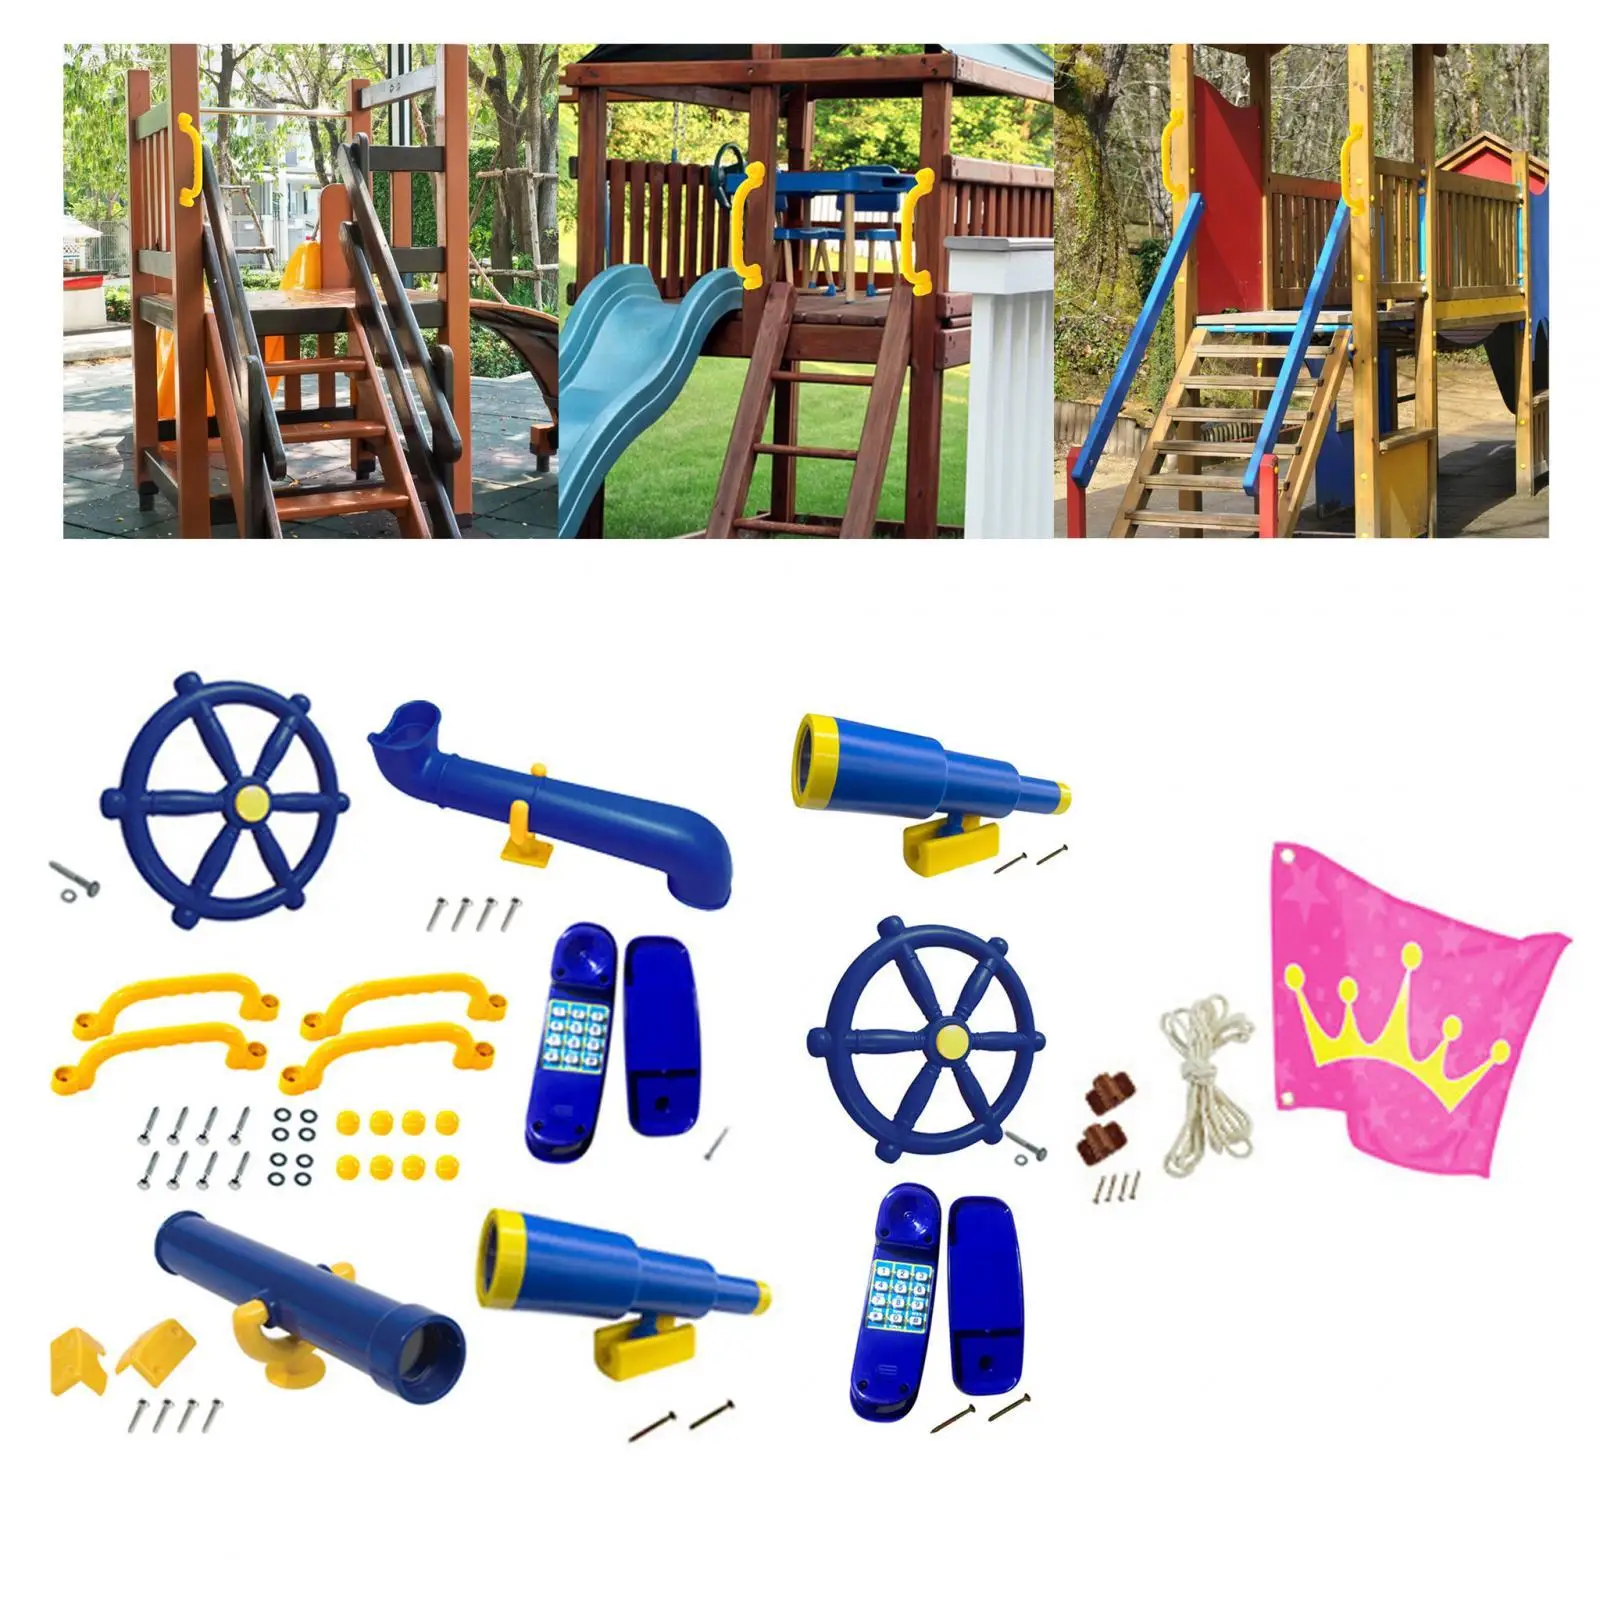 Playground Accessories Outdoor Games Toys Swing Set Attachments Outdoor Playset for Backyard Play House Swingset Outdoor